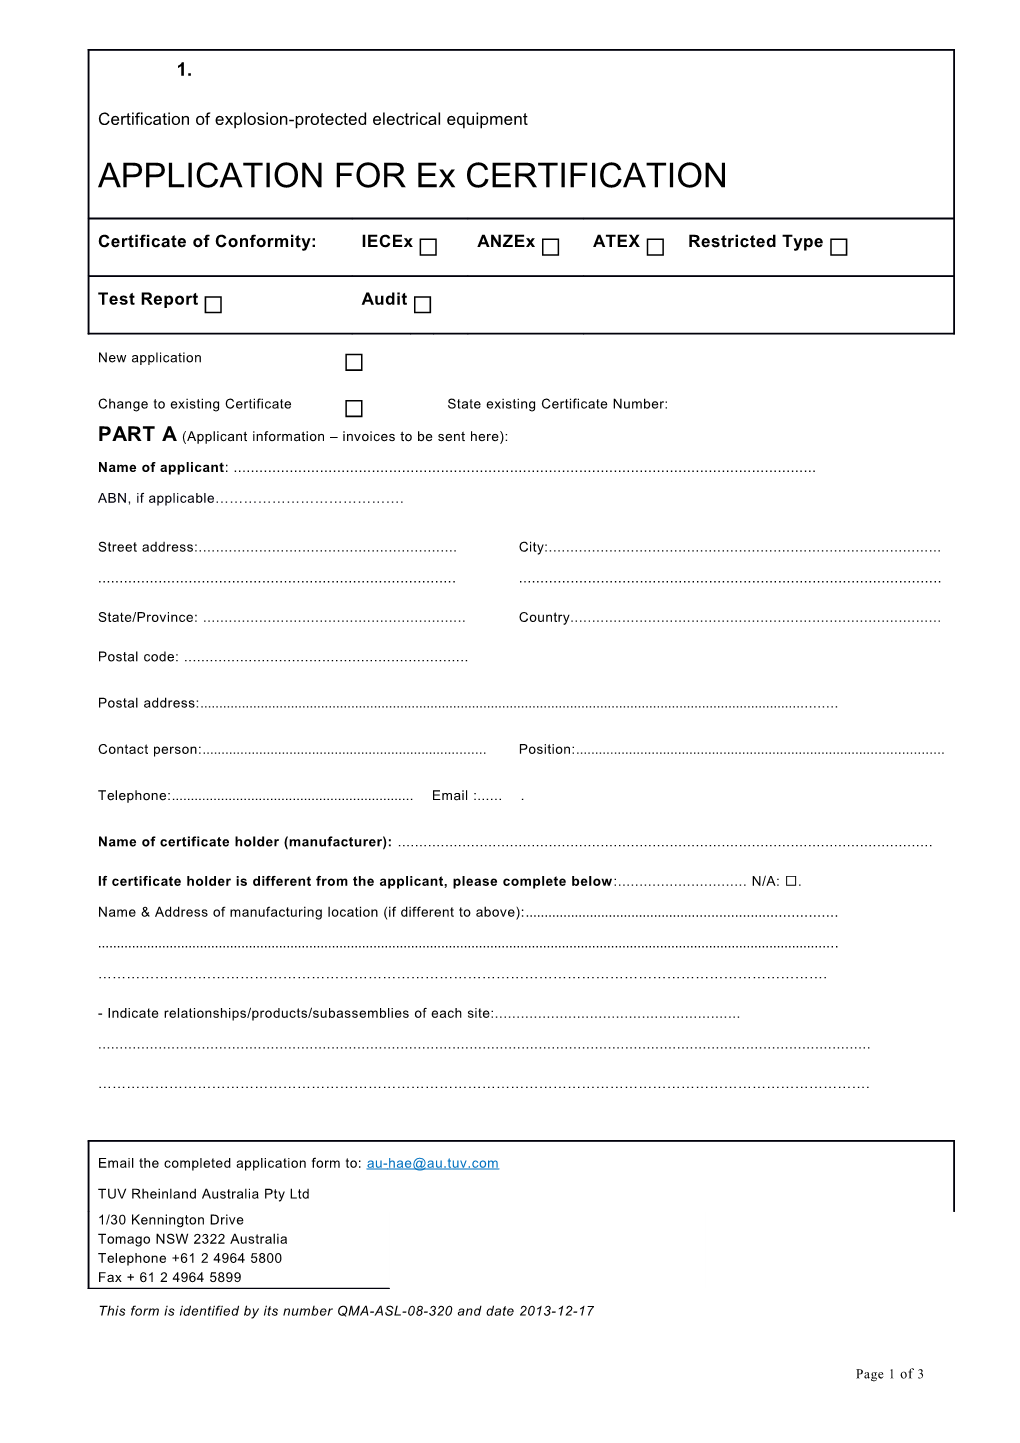 This Form Is Identified by Its Number QMA-ASL-08-320 and Date 2013-12-17